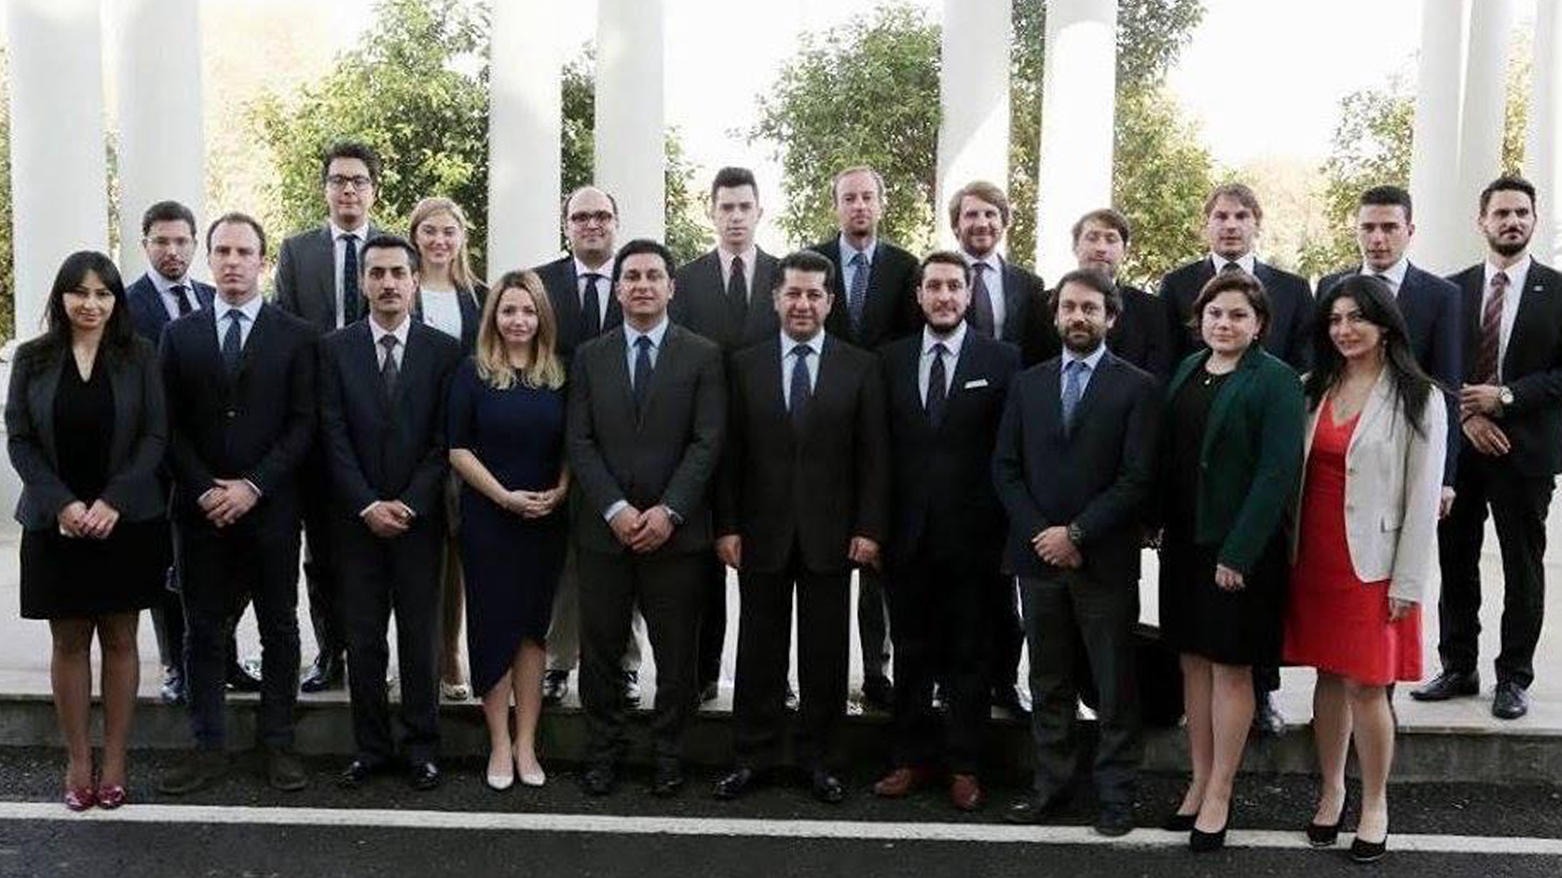 The members of the Democratic Youth Community of Europe posing for a picture with Kurdistan Region Prime Minister Masrour Barzani. (Photo: Submitted to Kurdistan24)